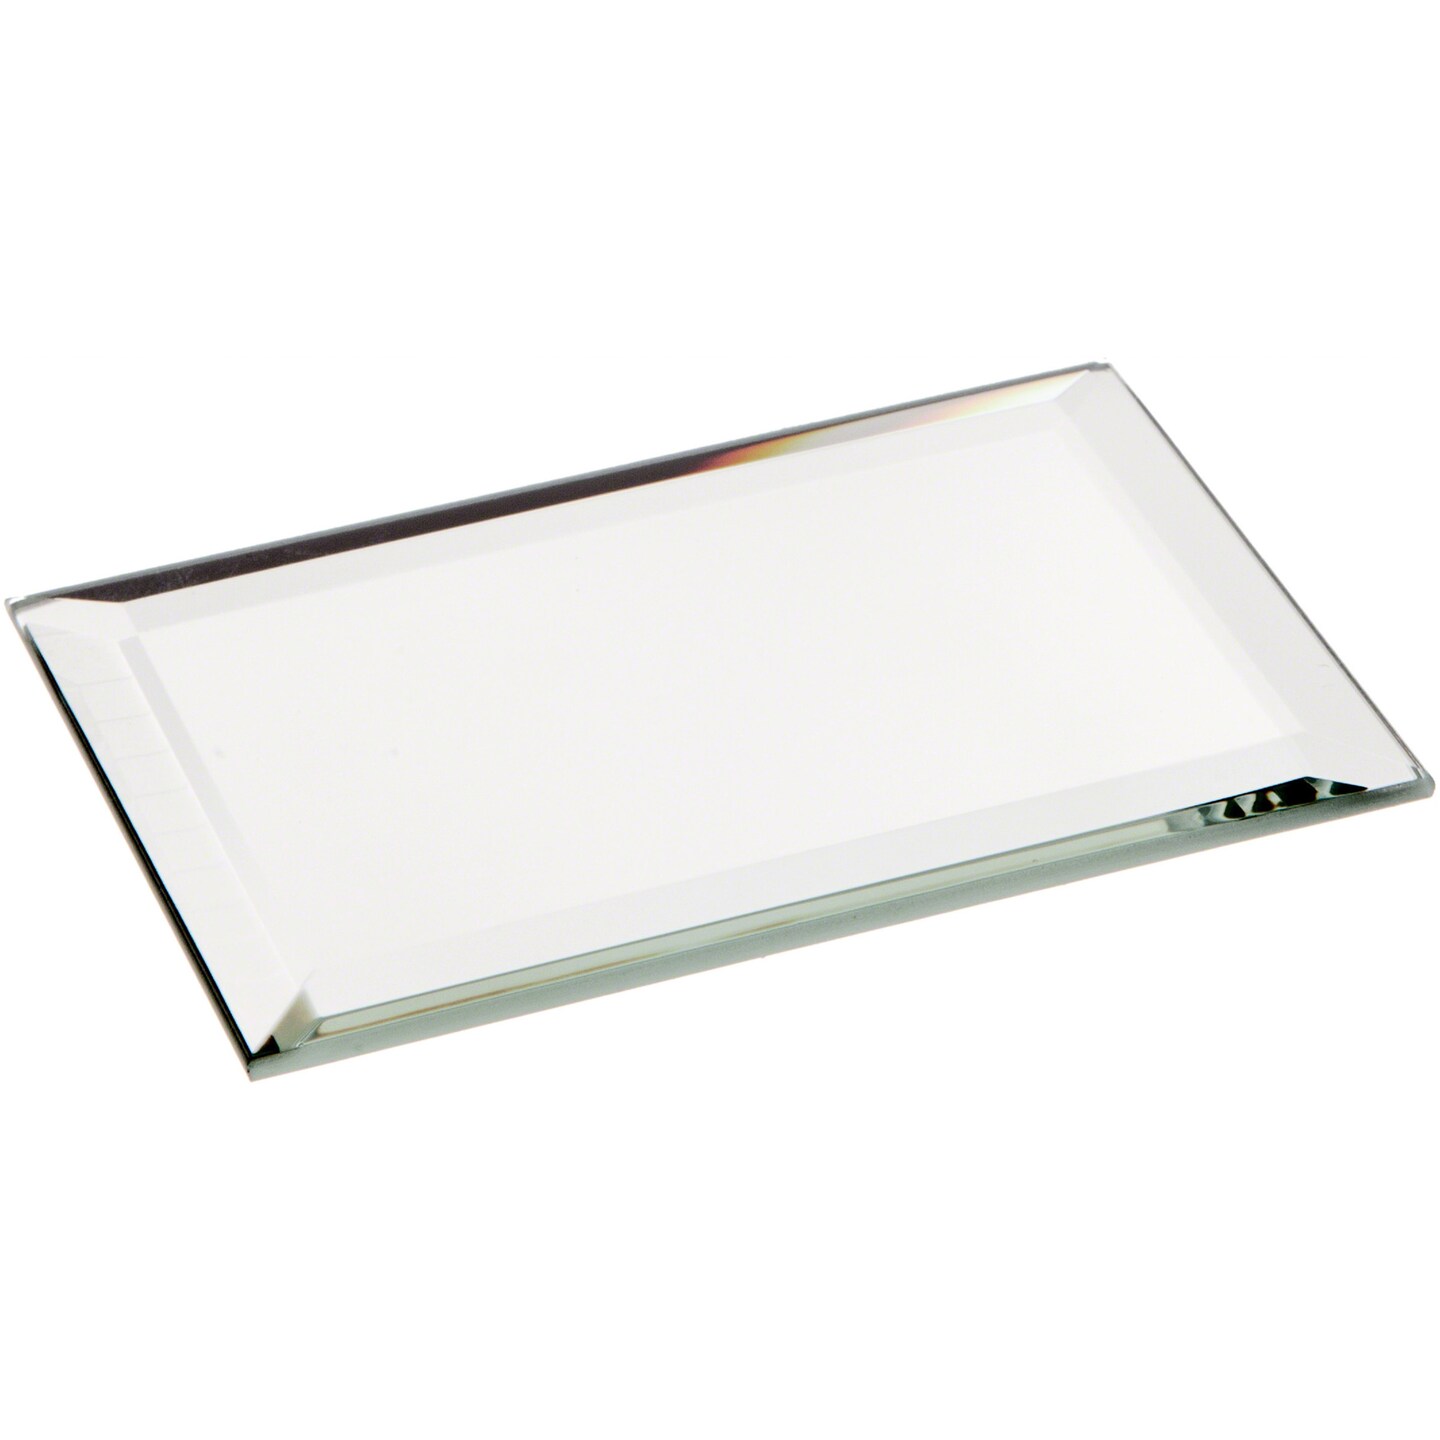 Plymor Rectangle 3mm Beveled Glass Mirror, 2 inch x 3 inch